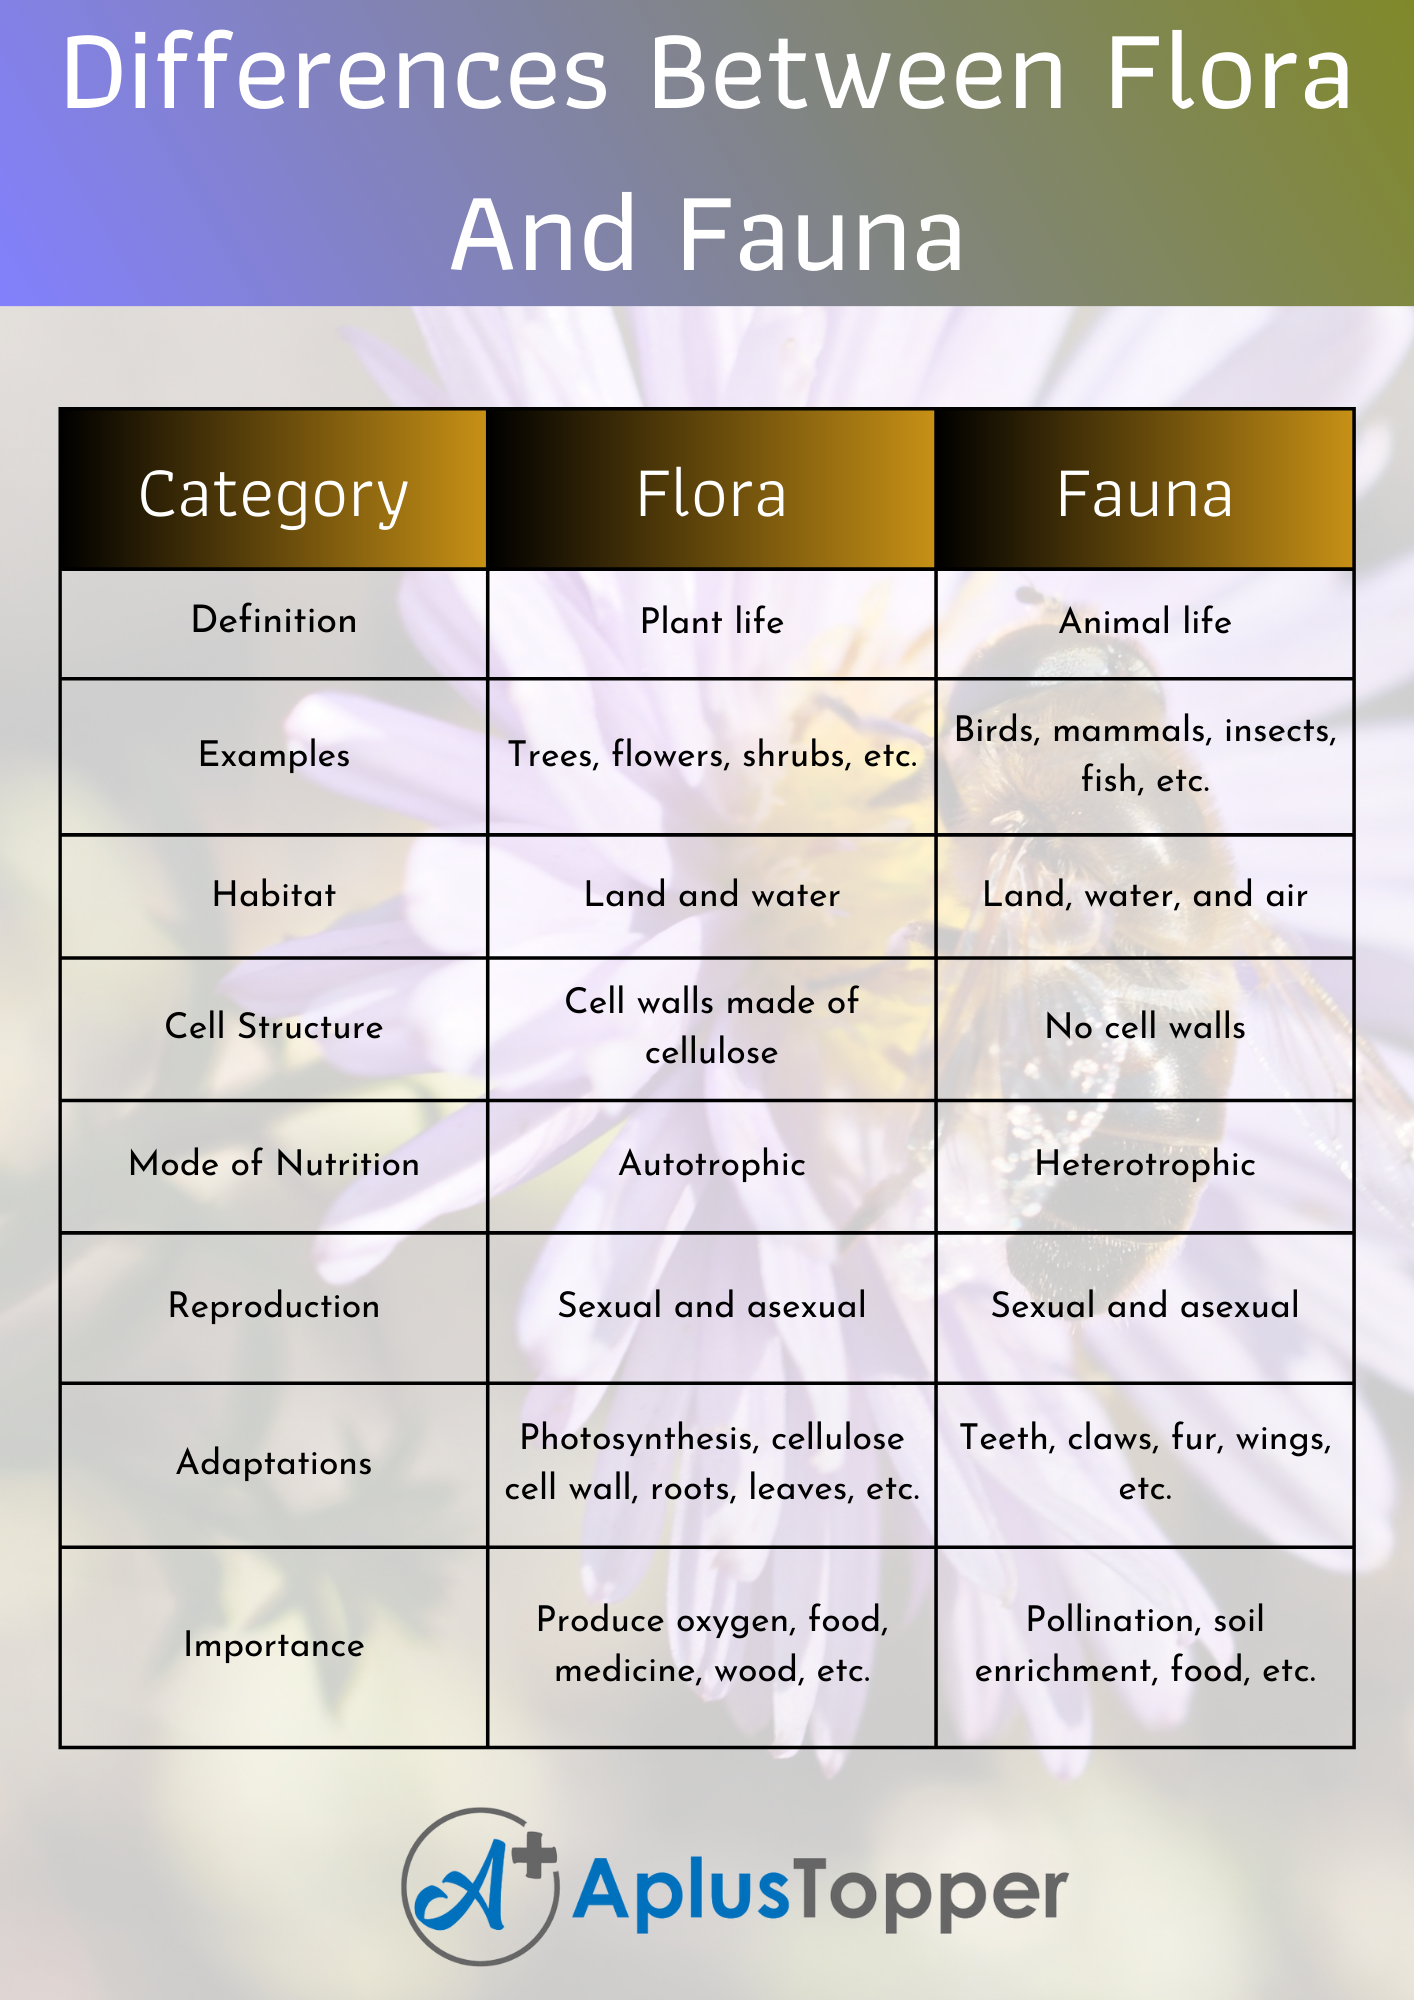 Differences Between Flora And Fauna